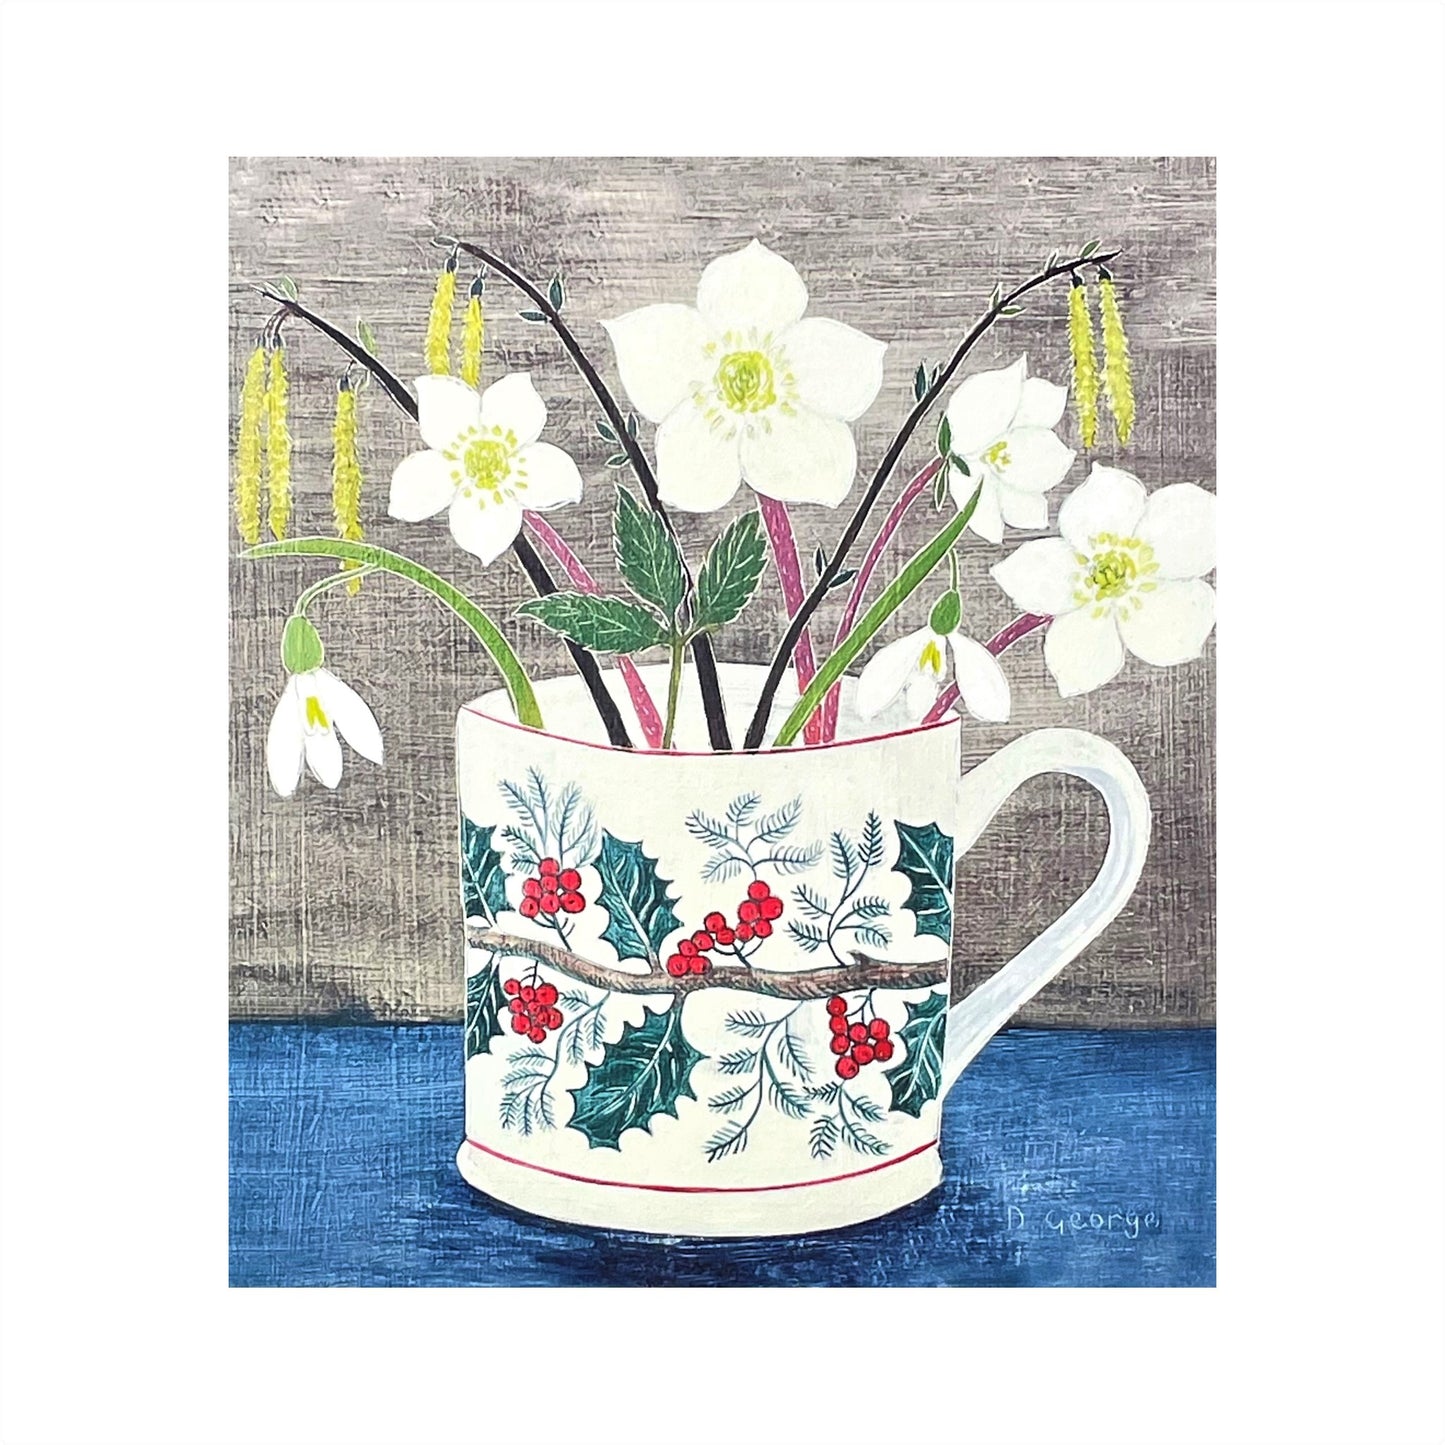 greetings card showing a decorated cup with hellebores inside by Canns Down Press